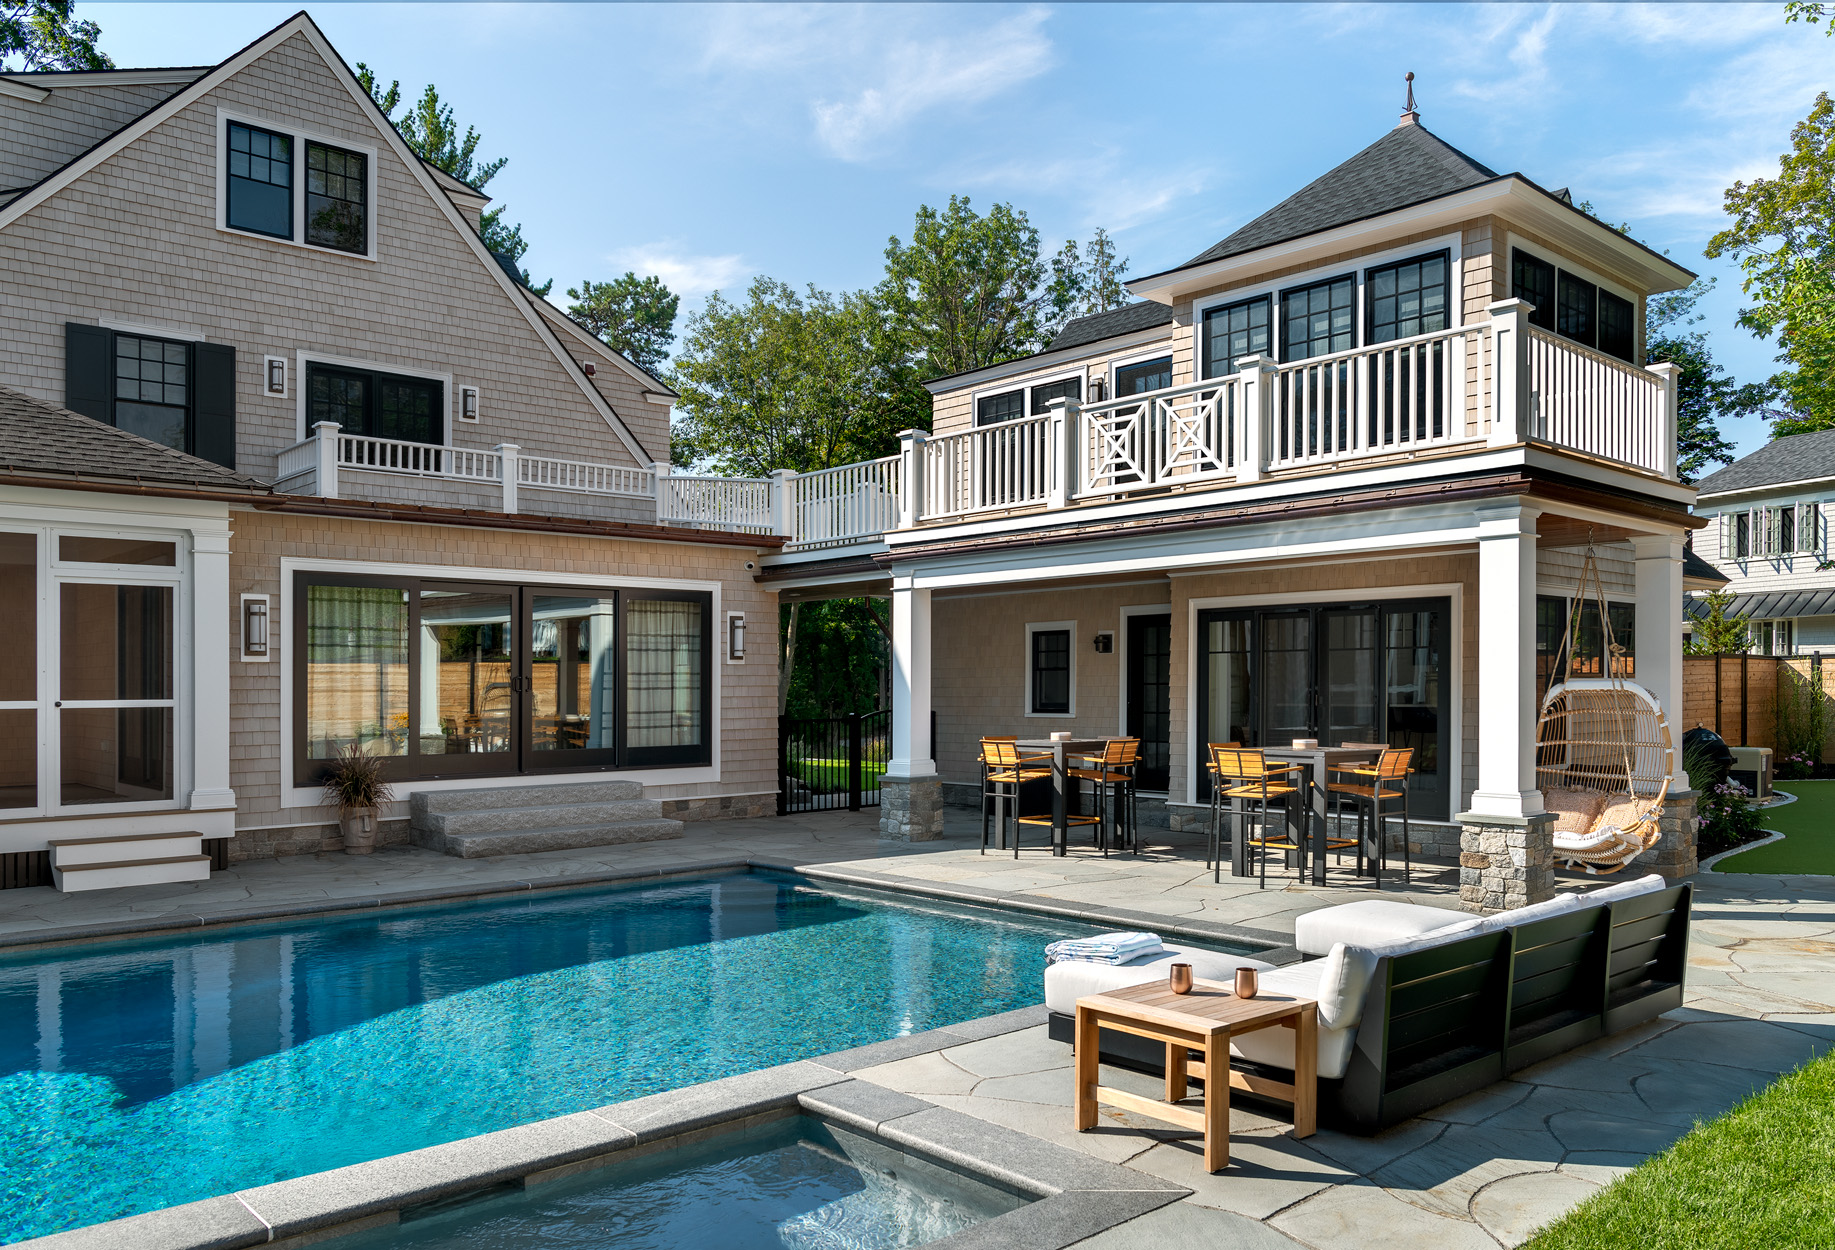 Luxurious backyard with a swimming pool in Wells, Maine, flanked by two custom homes, featuring a furnished patio area and lush landscaping.